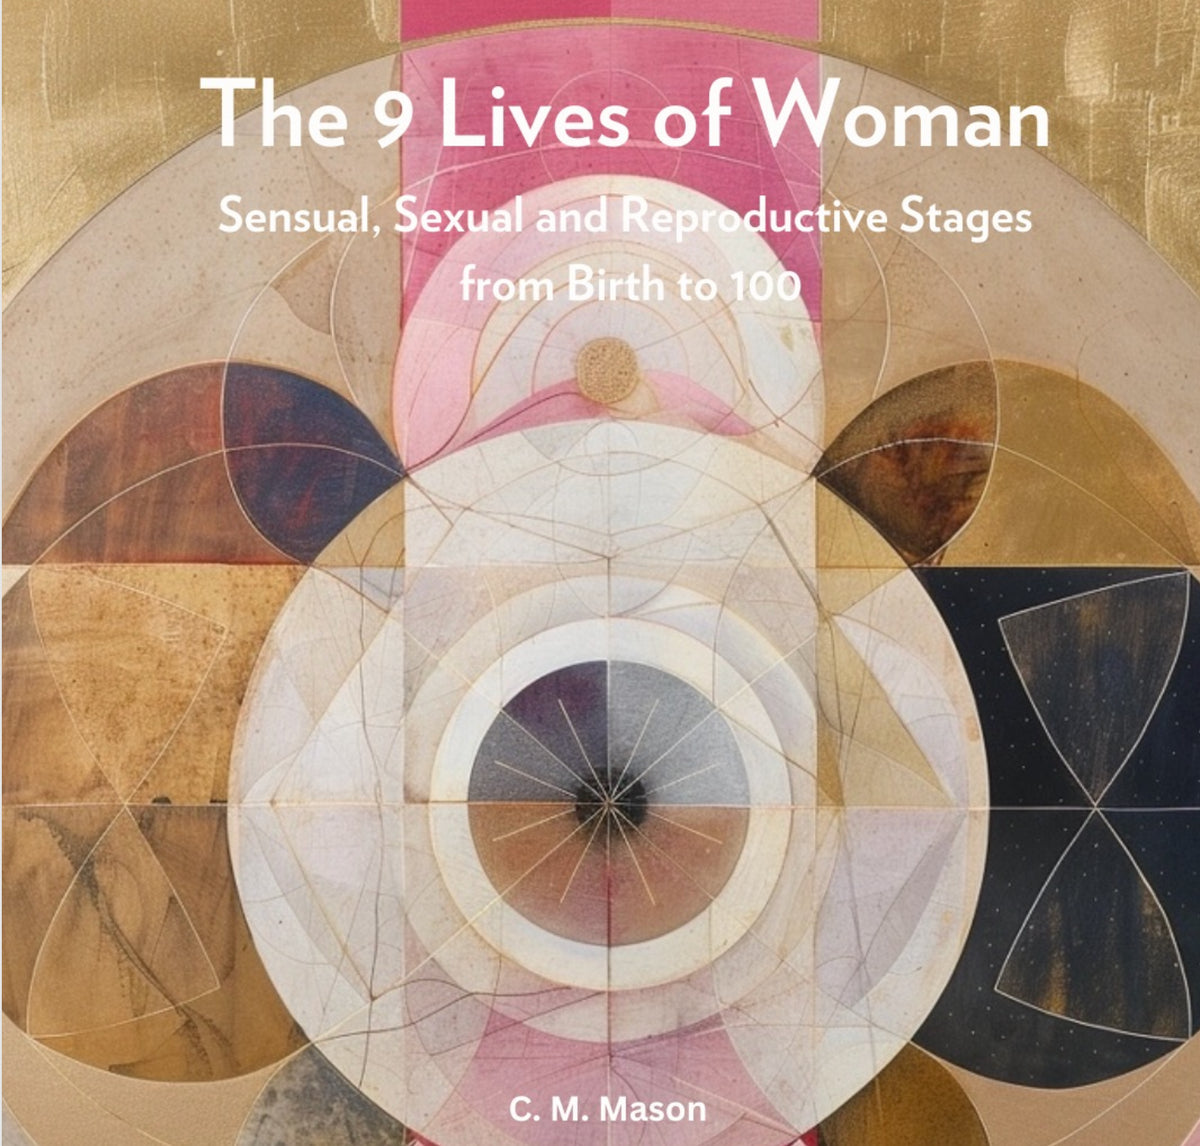 Intro, Part 1: The Sensual, Sexual and Reproductive Stages of a Woman's Life From Birth to 100